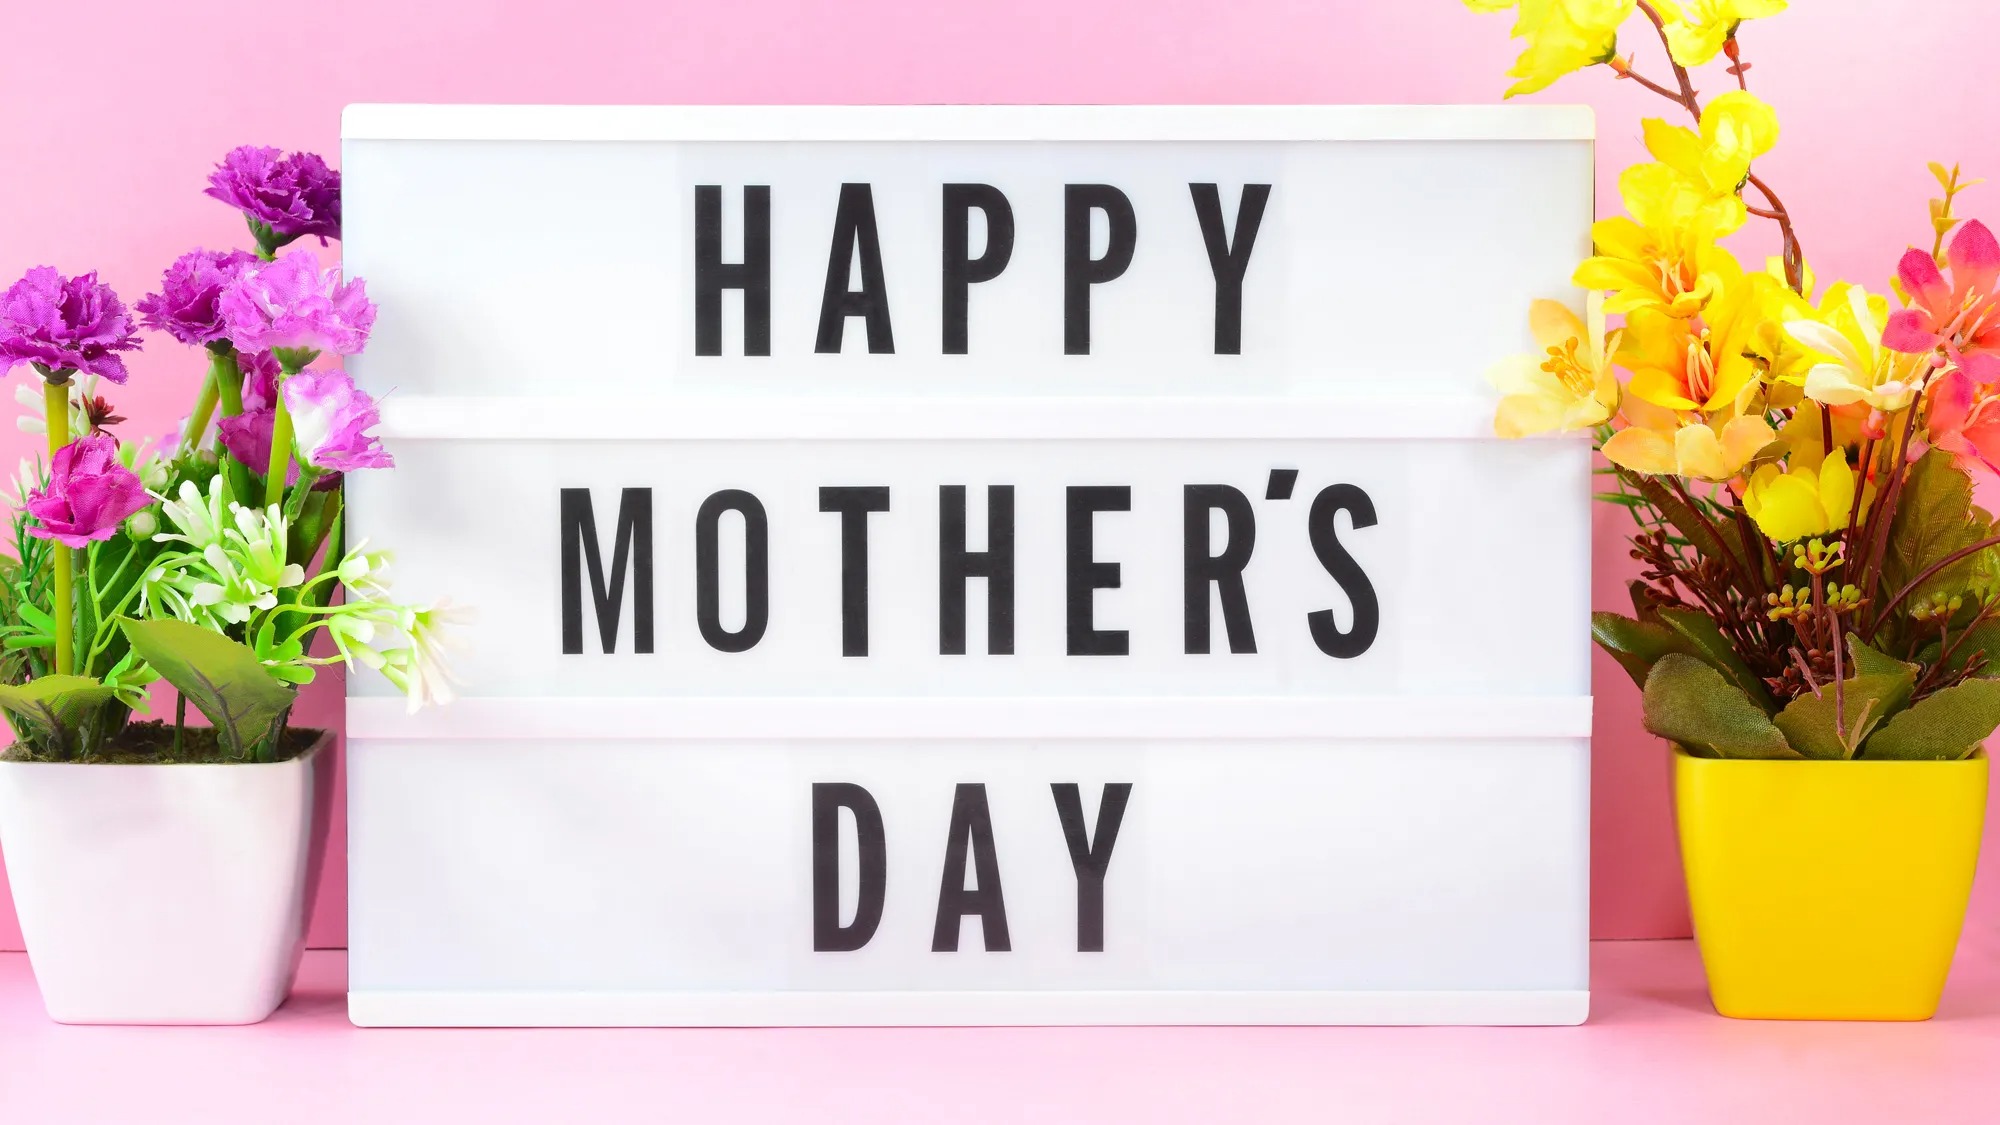 Top Mother's Day Gift Ideas to Make Her Day Special (1)